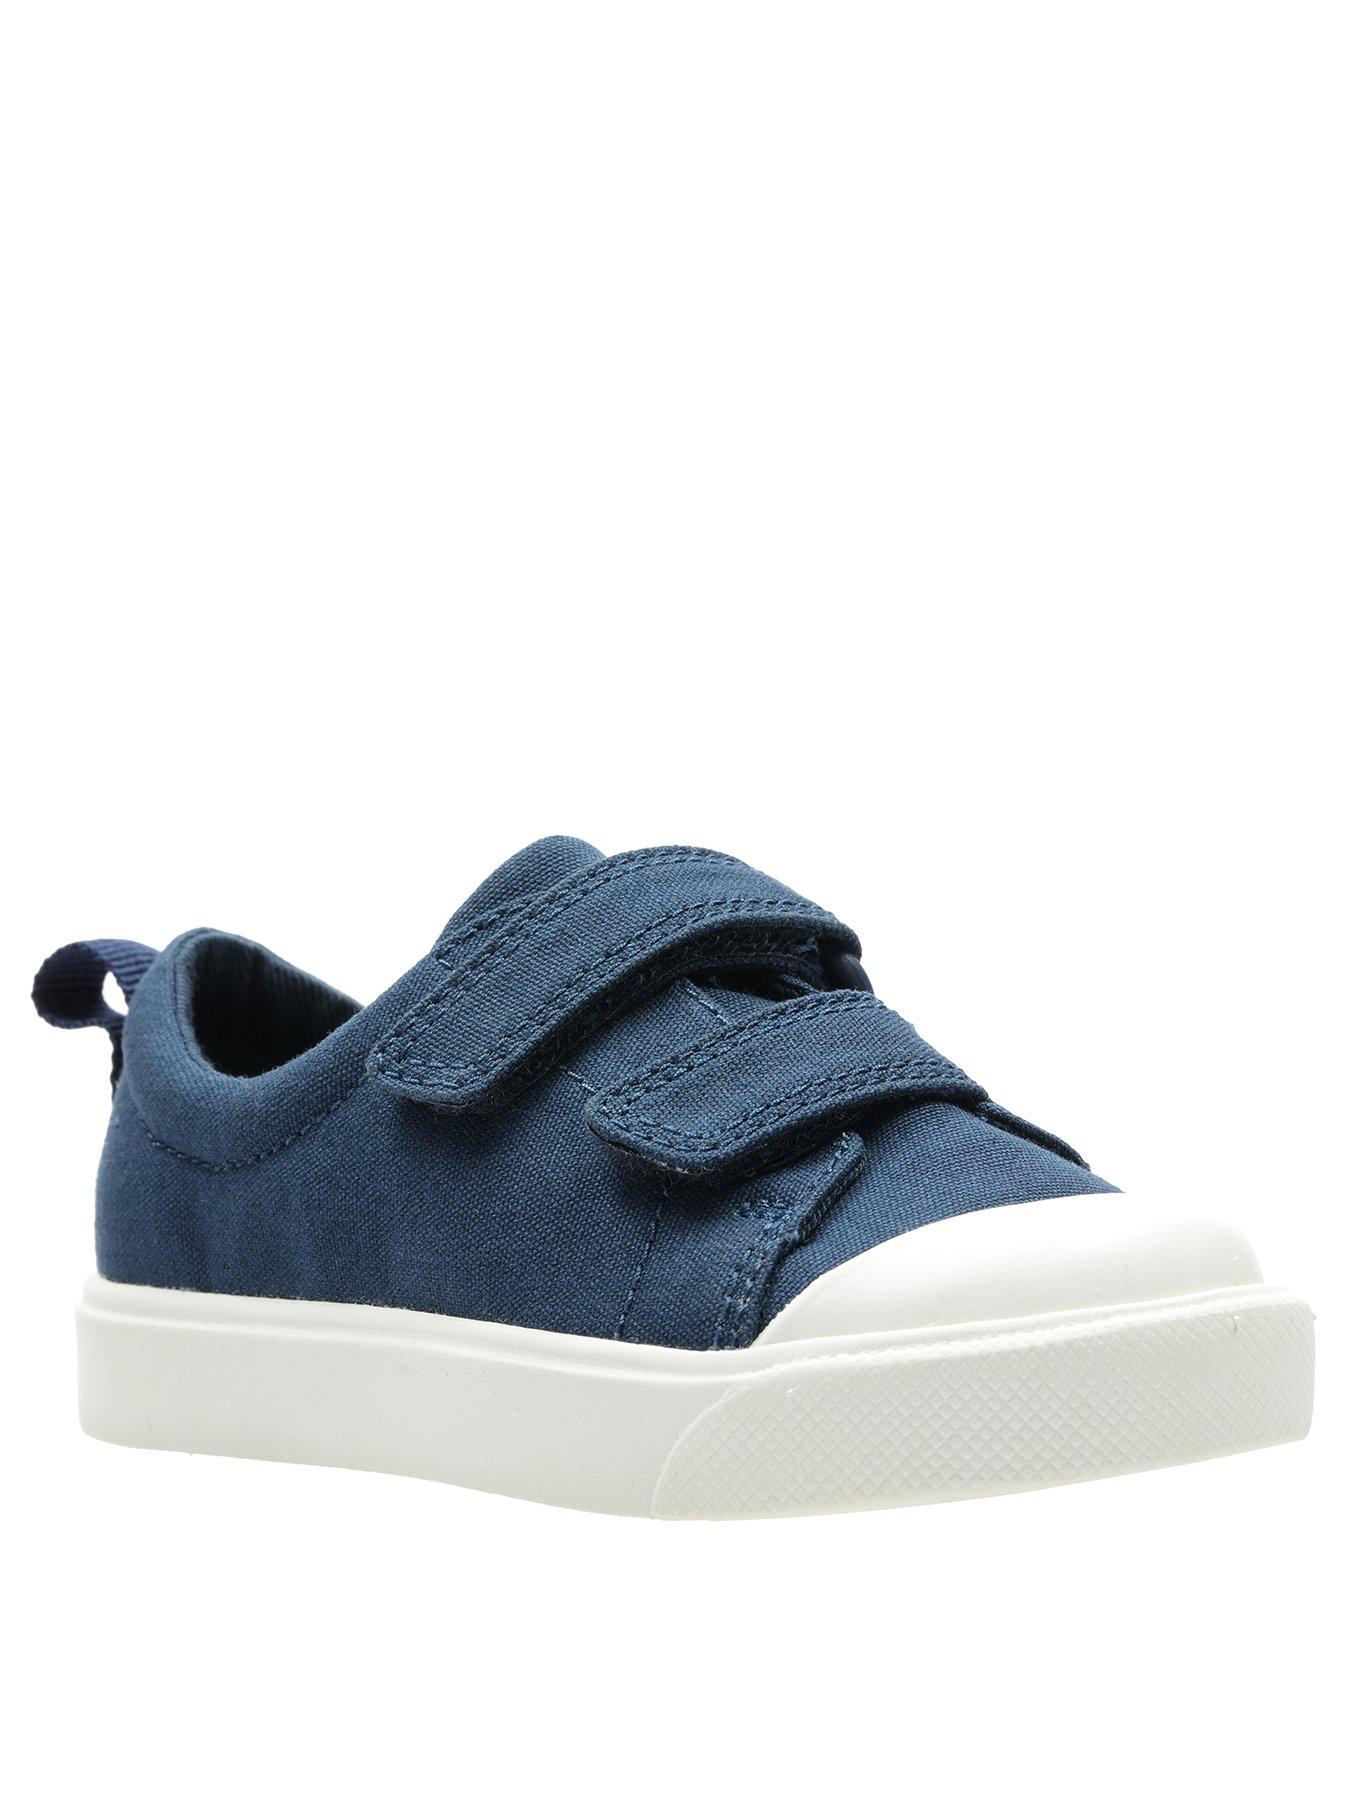 clarks city flare lo toddler